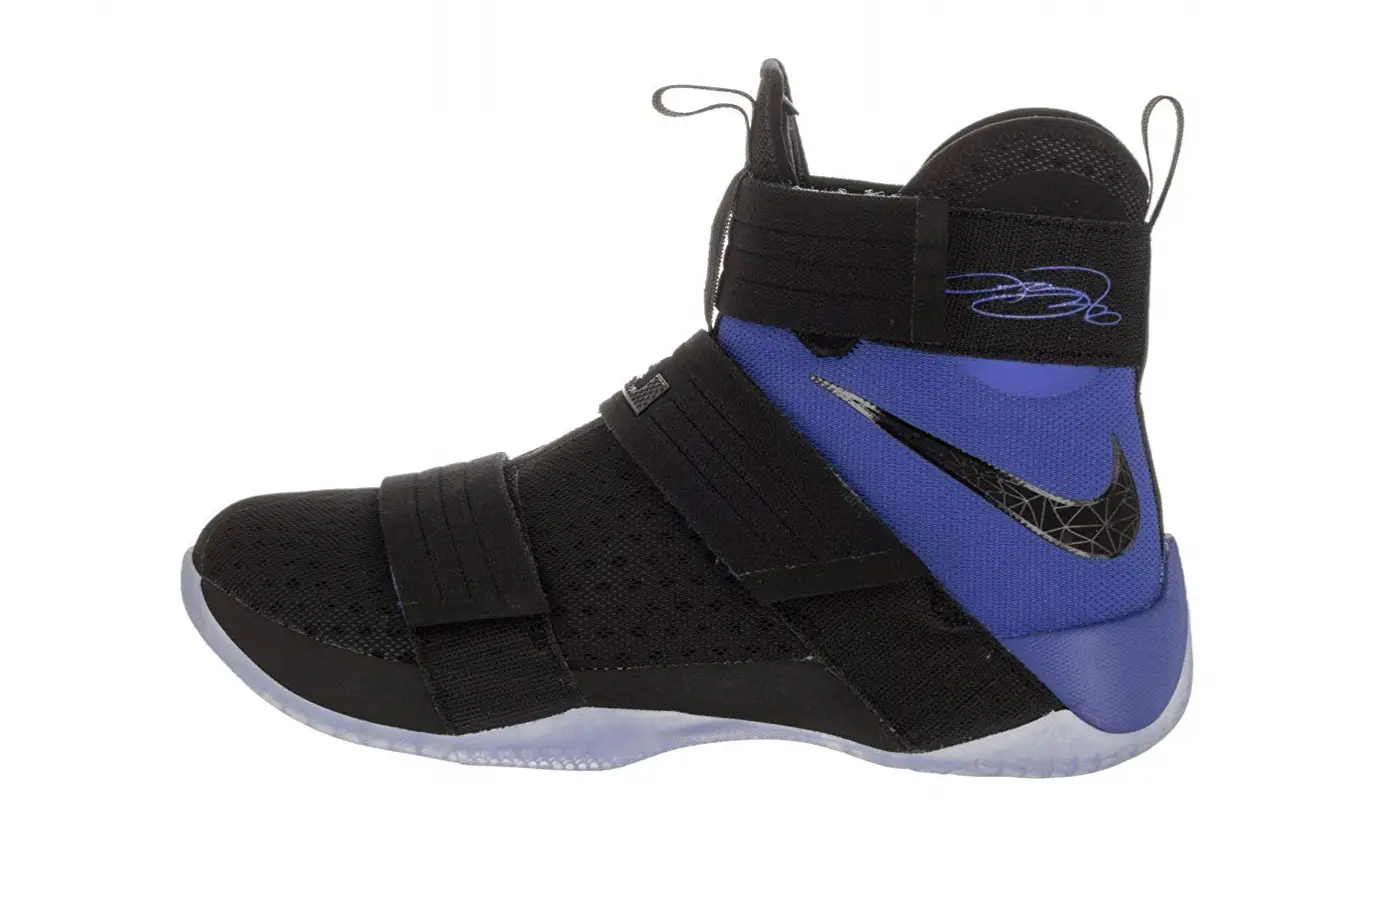 Nike Lebron Soldier 10 SFG has a bootie style cussion that gives a more breathable support.